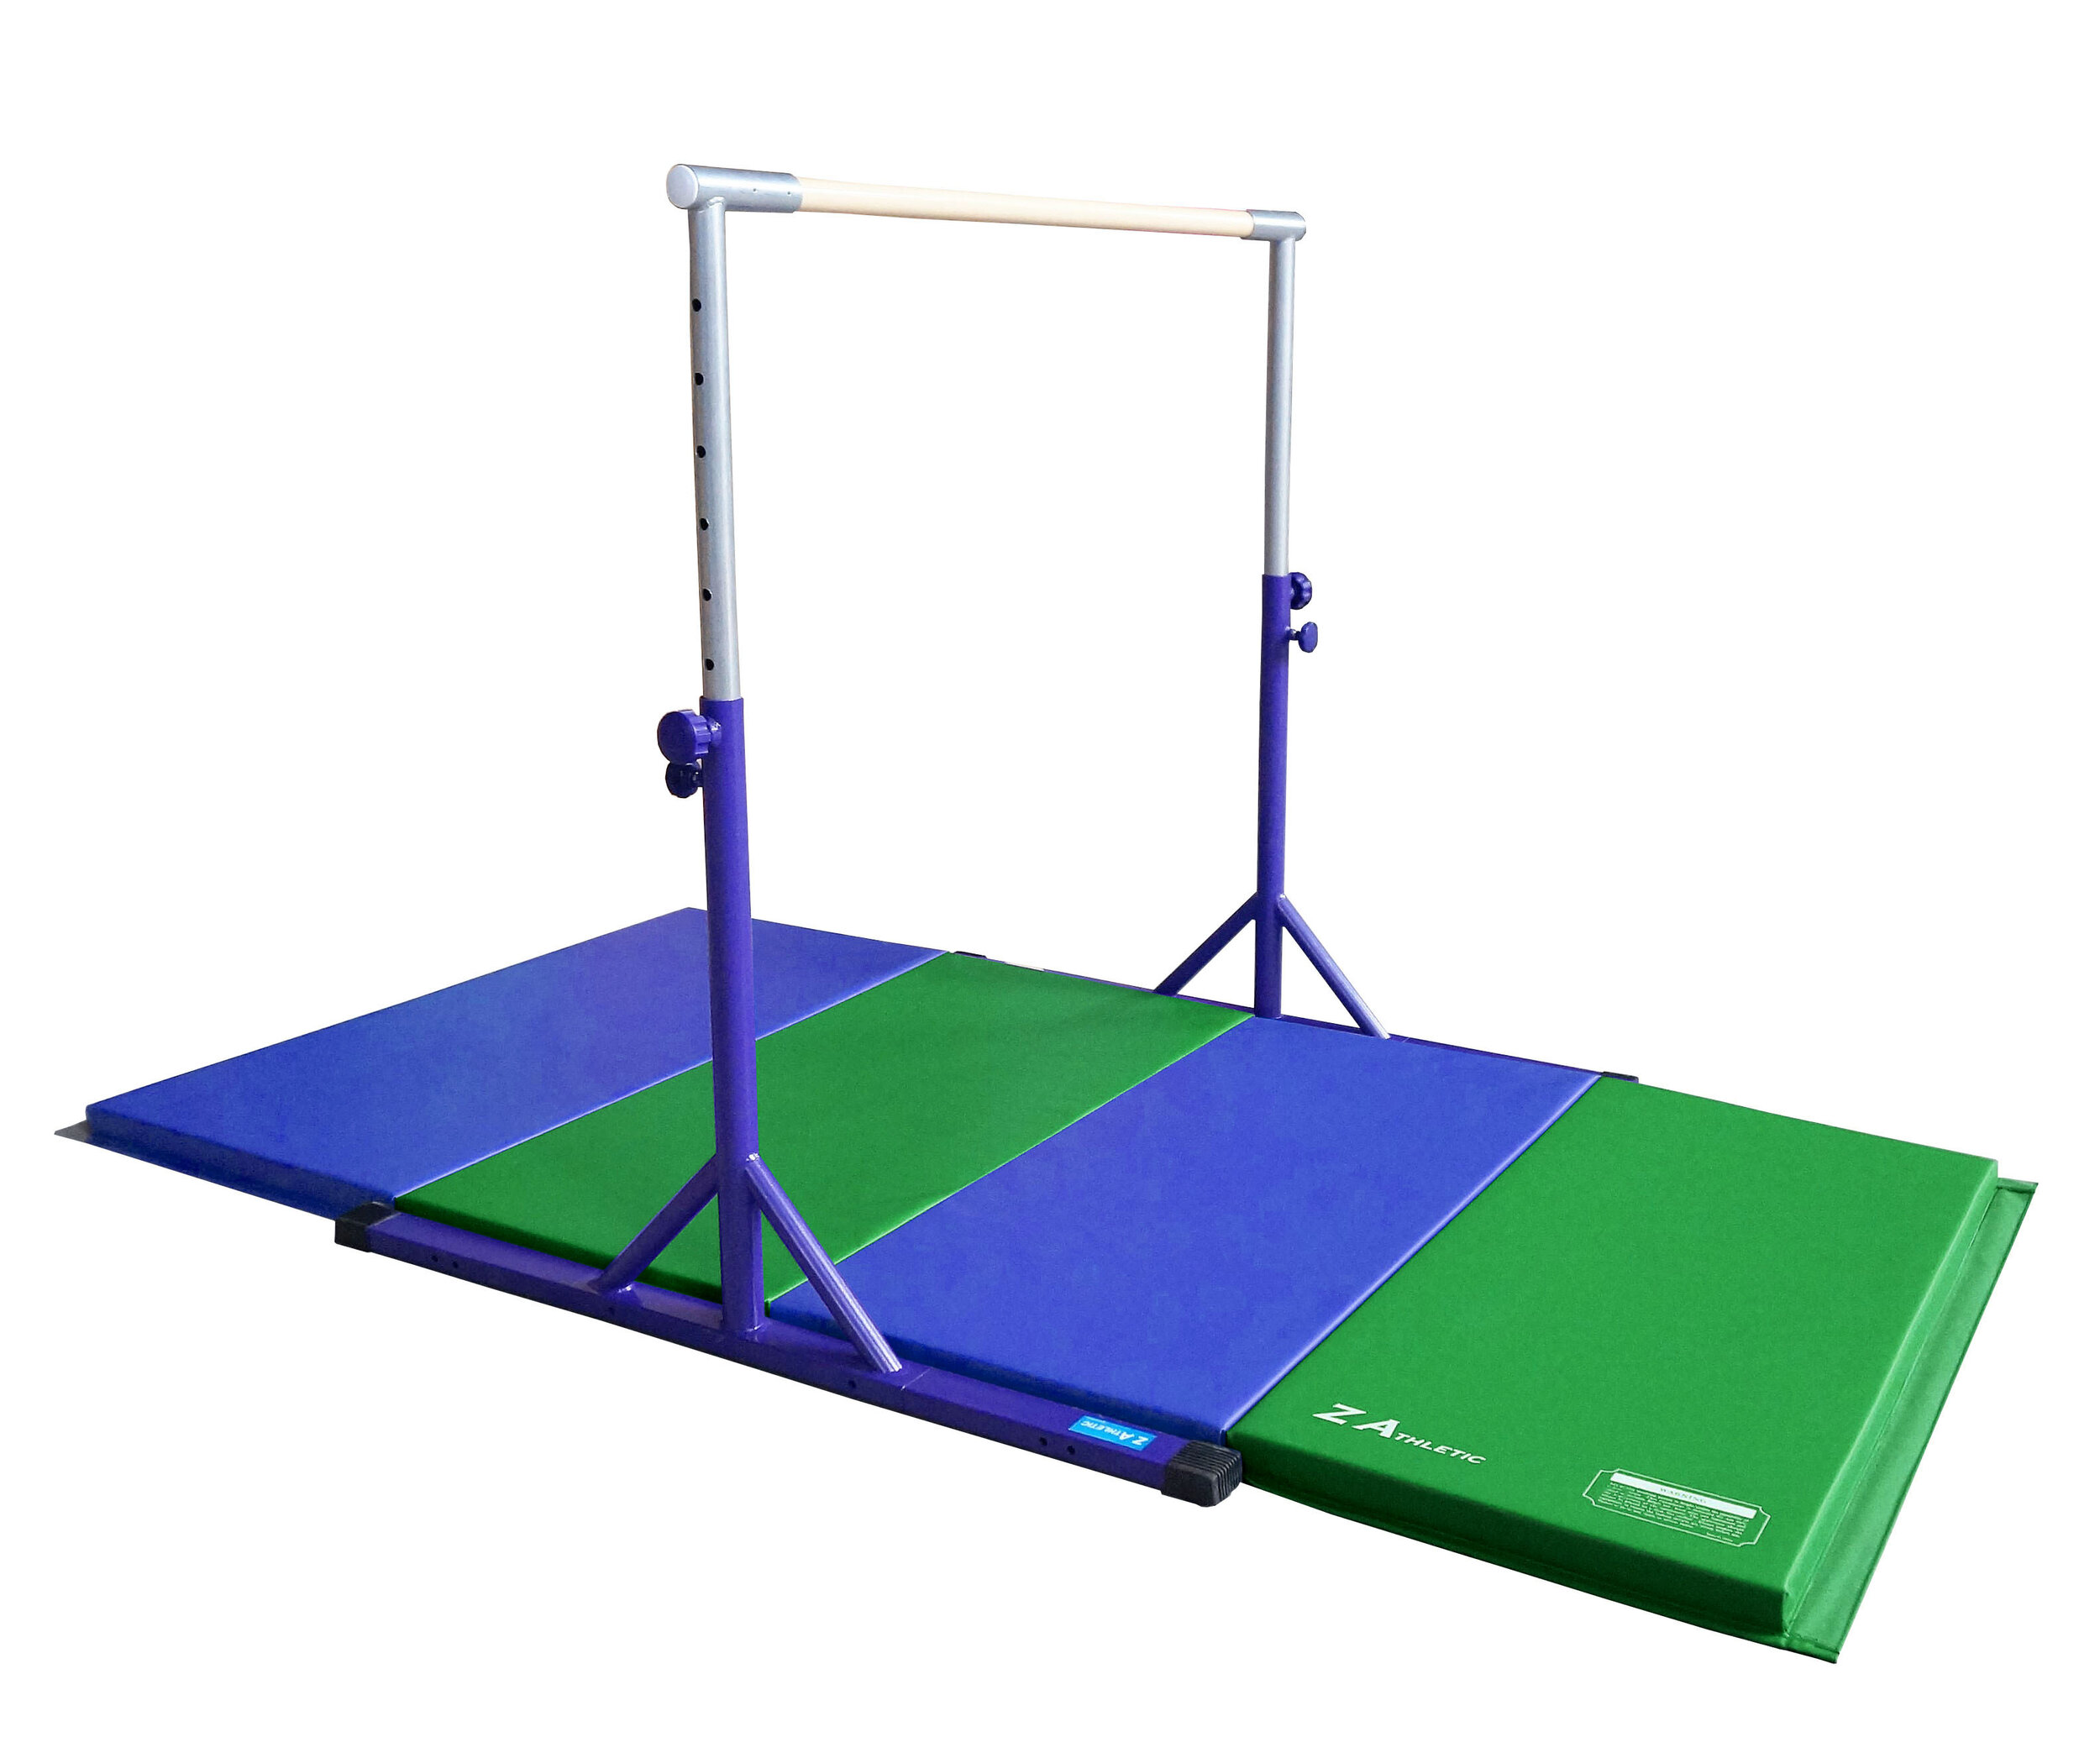 Z Athletic Elite Adjustable Bar with Gym Mat for In-Home Children’s Gymnastics Multiple Colors/Sizes